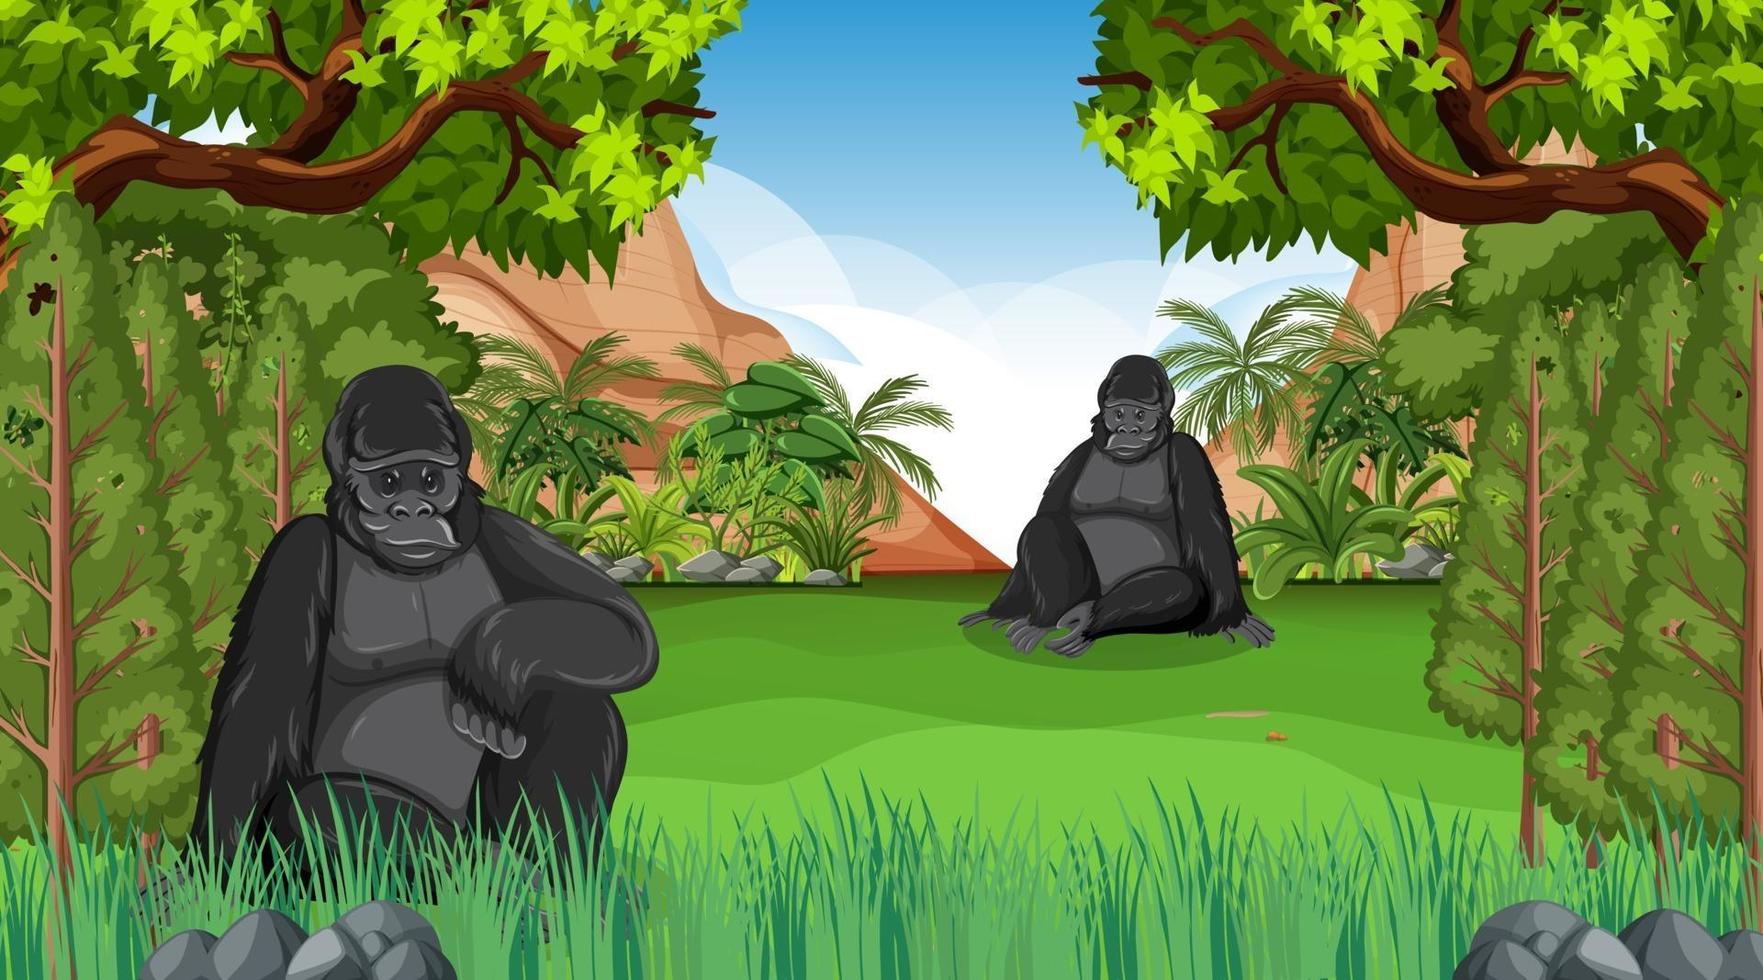 Gorilla in forest or rainforest scene with many trees vector